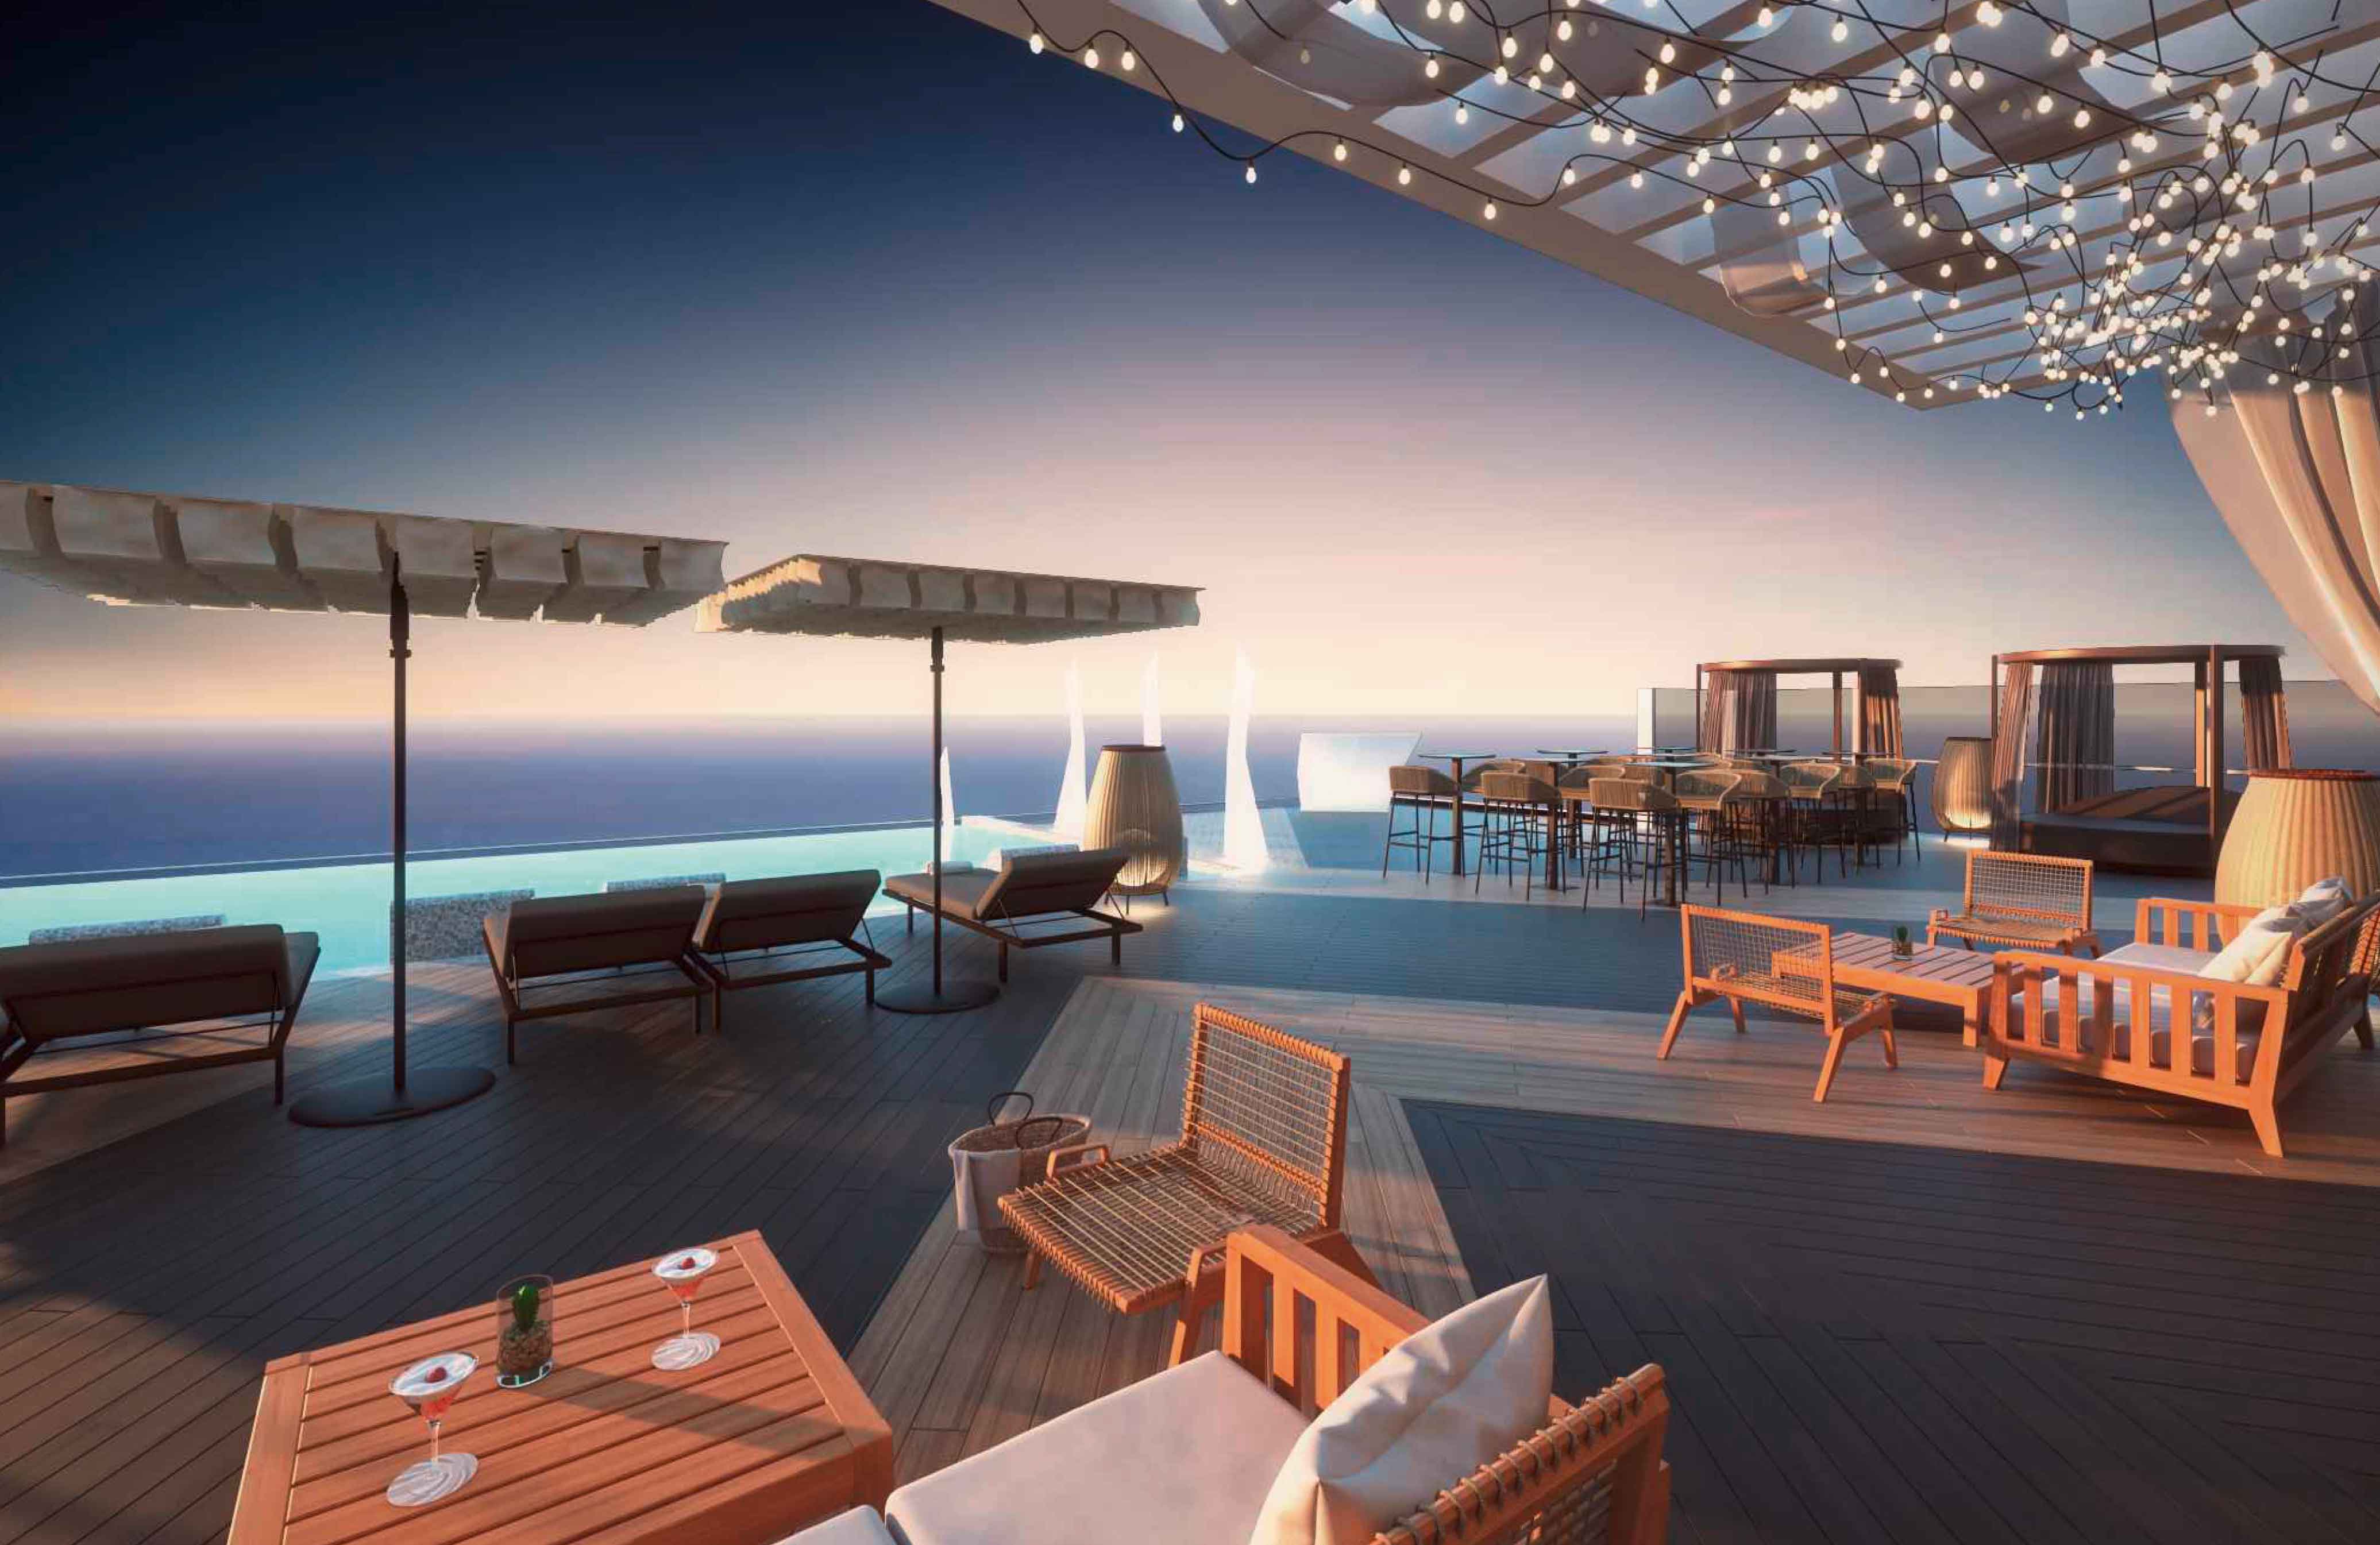 The World S First Robinson Club Reinvents Itself Tui S Premium